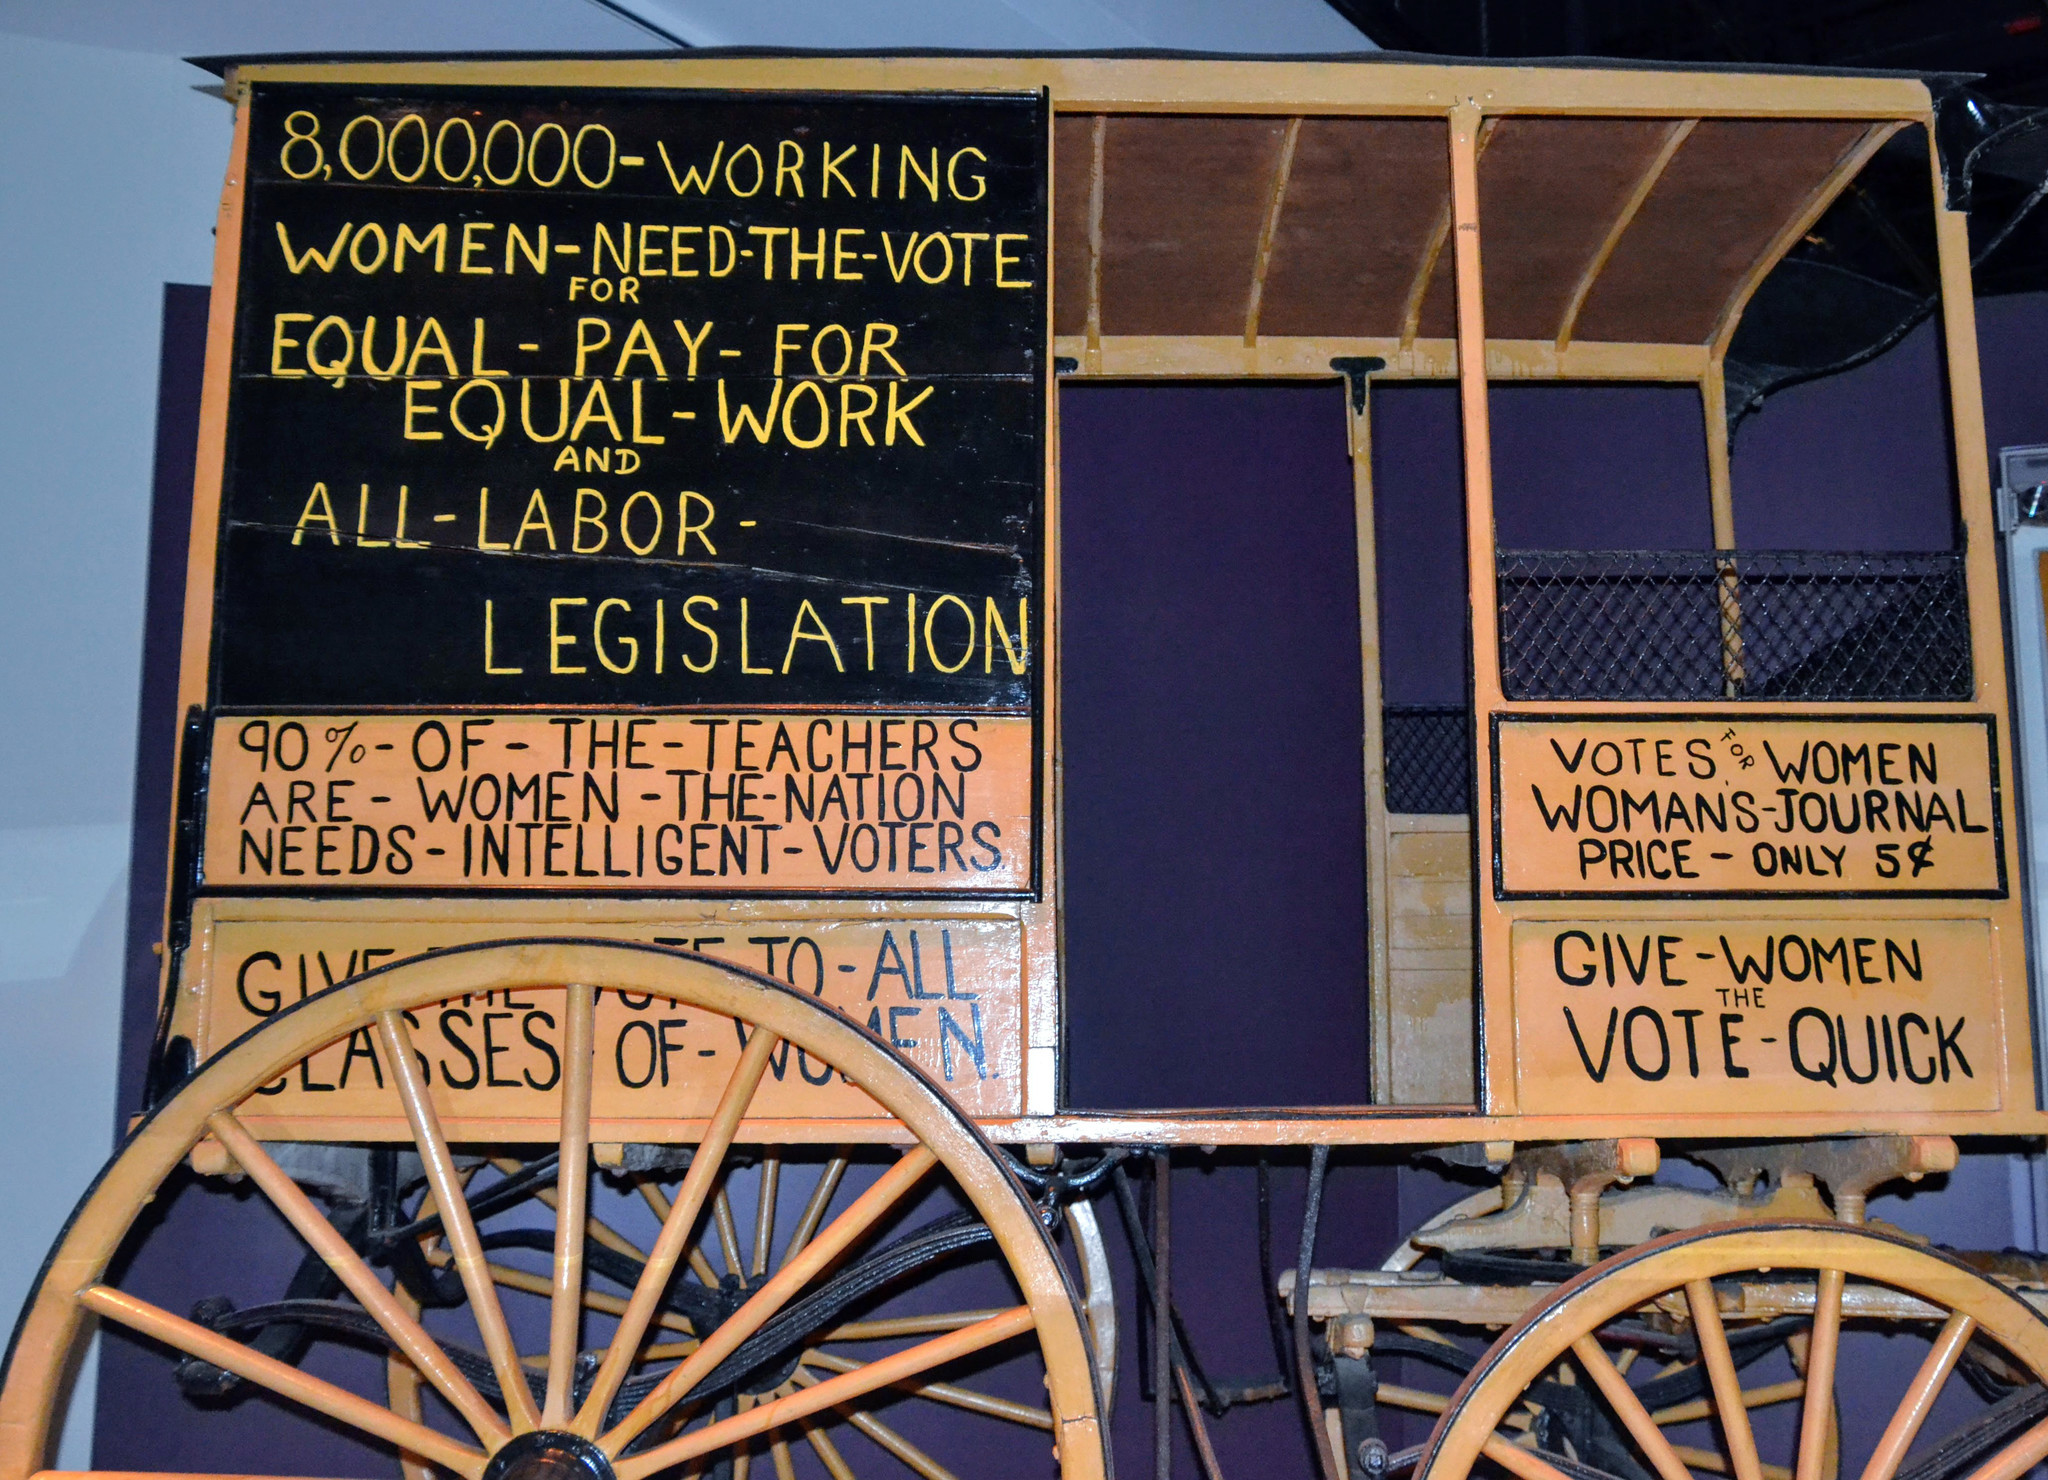 This wagon was used from the 1870s to 1920 in the suffrage movement. It is on display at the National Museum of American History in Washington, D.C.